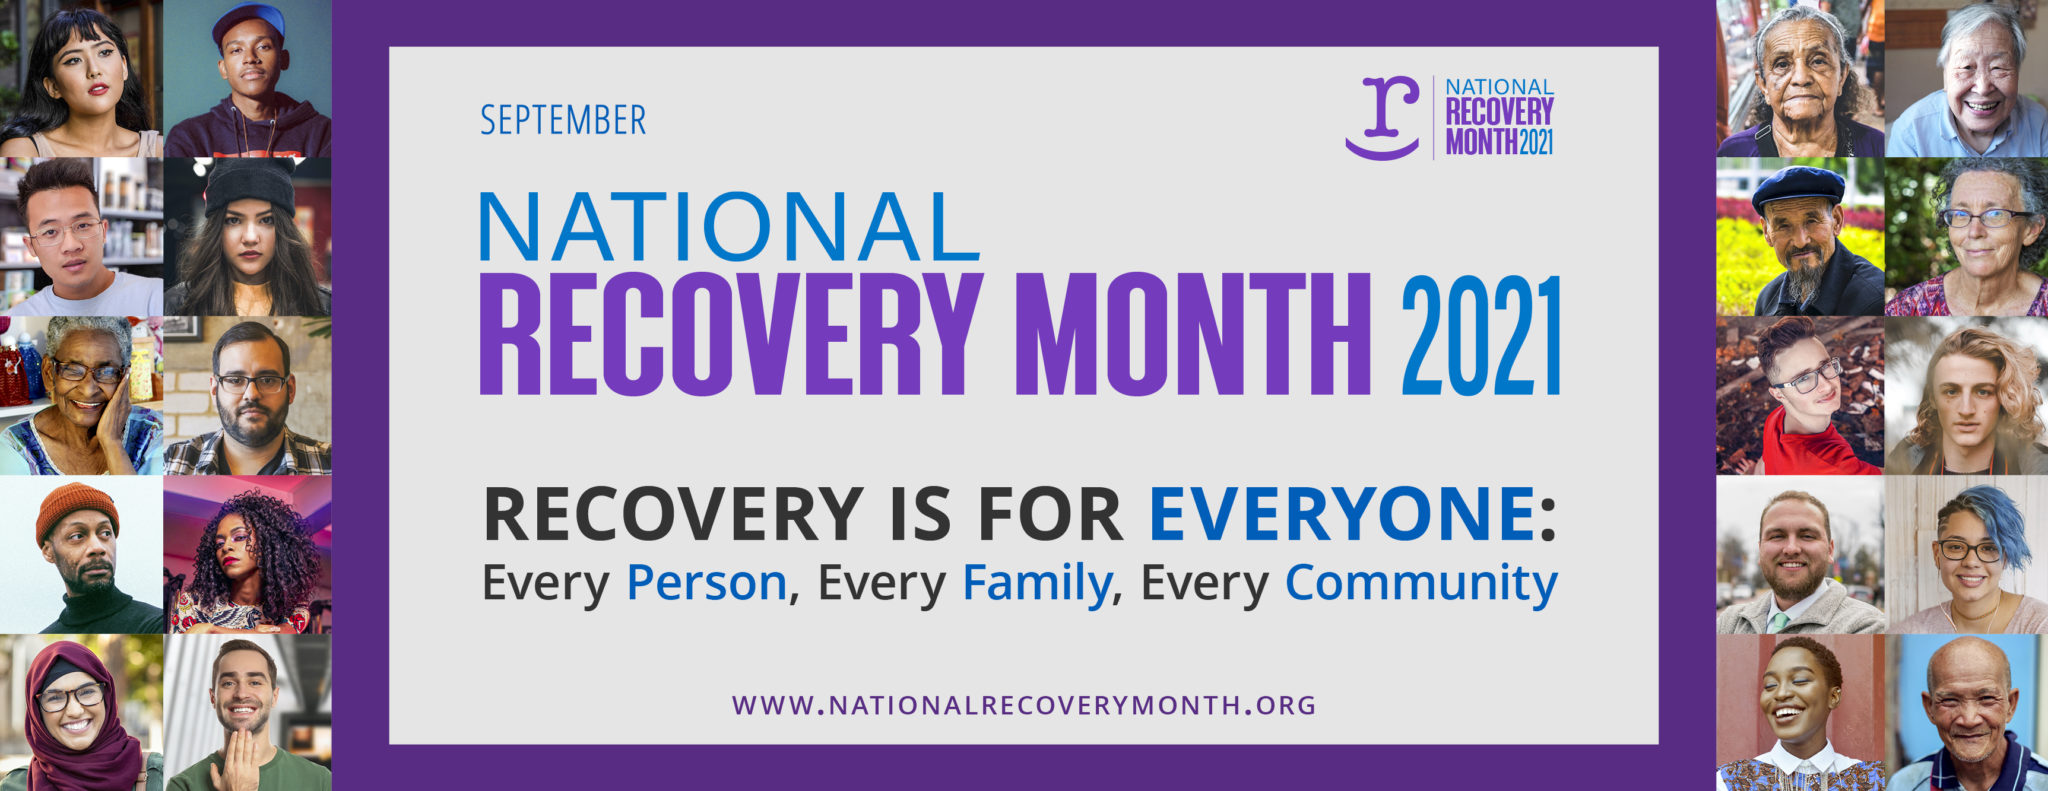 Images of people in recovery with language for Recovery Month